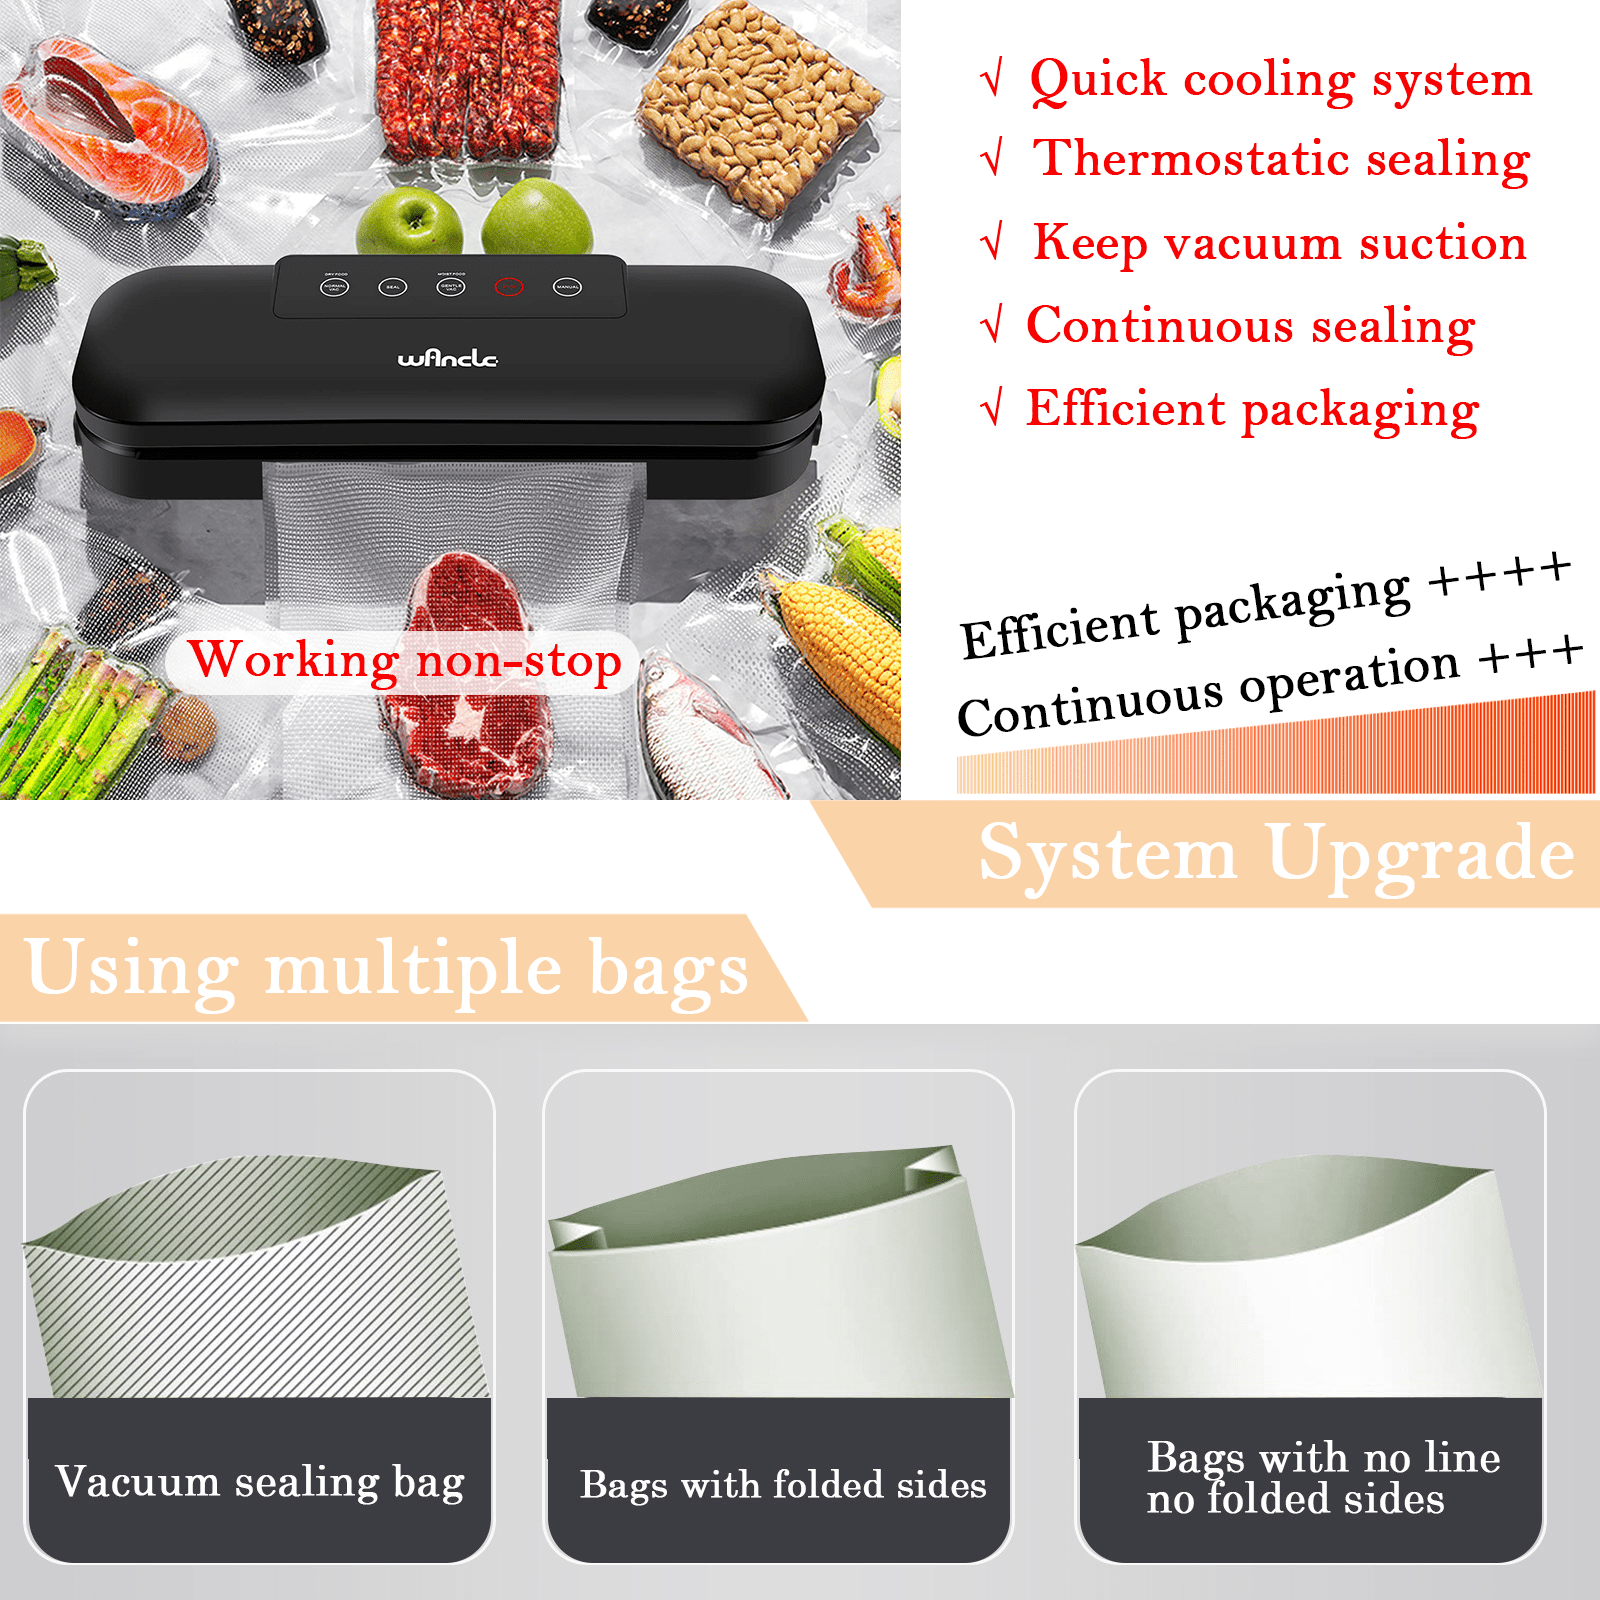 OURECO Vacuum Sealer Machine, 60kpa Dry/Moist Food Sealer, Four Fresh Modes  to Deal With Various Food Preservation Problems, Compact Design with 20